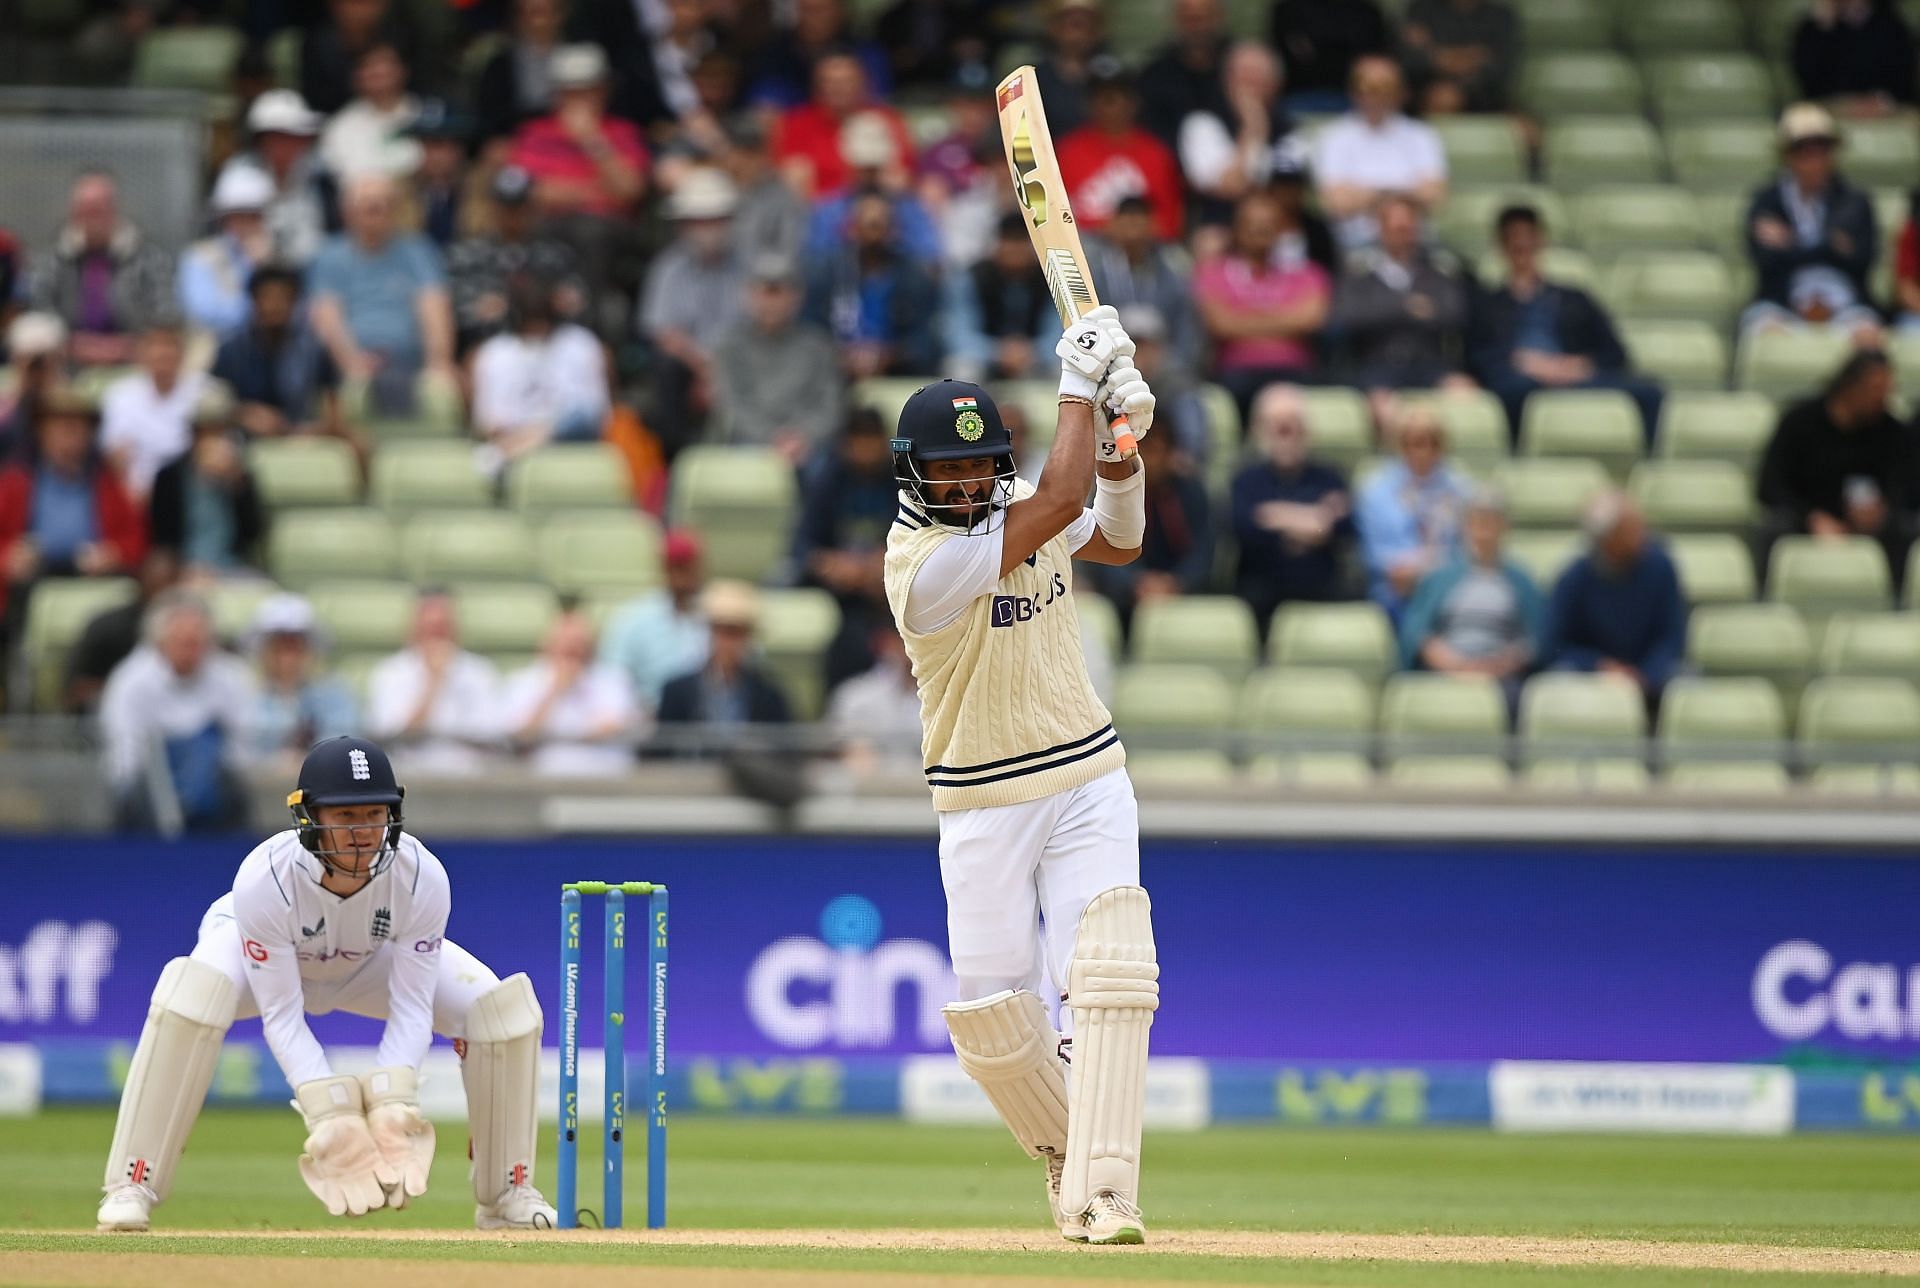 Fifth LV= Insurance Test Match: Day Four (Image: Getty)